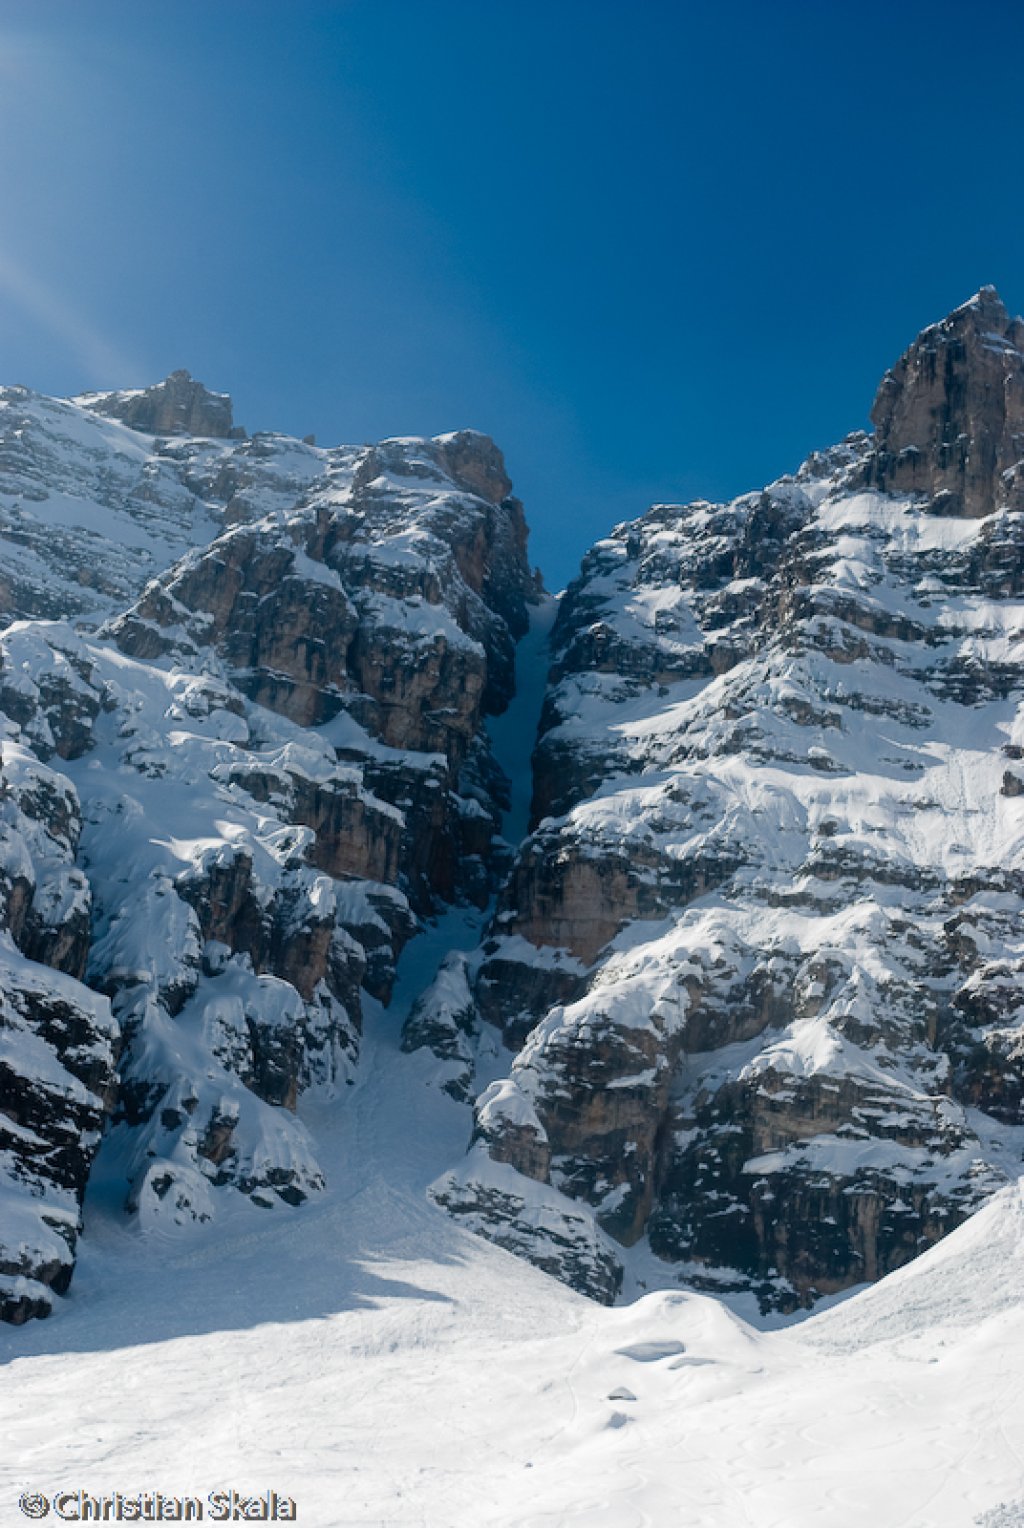 The couloir seen from below